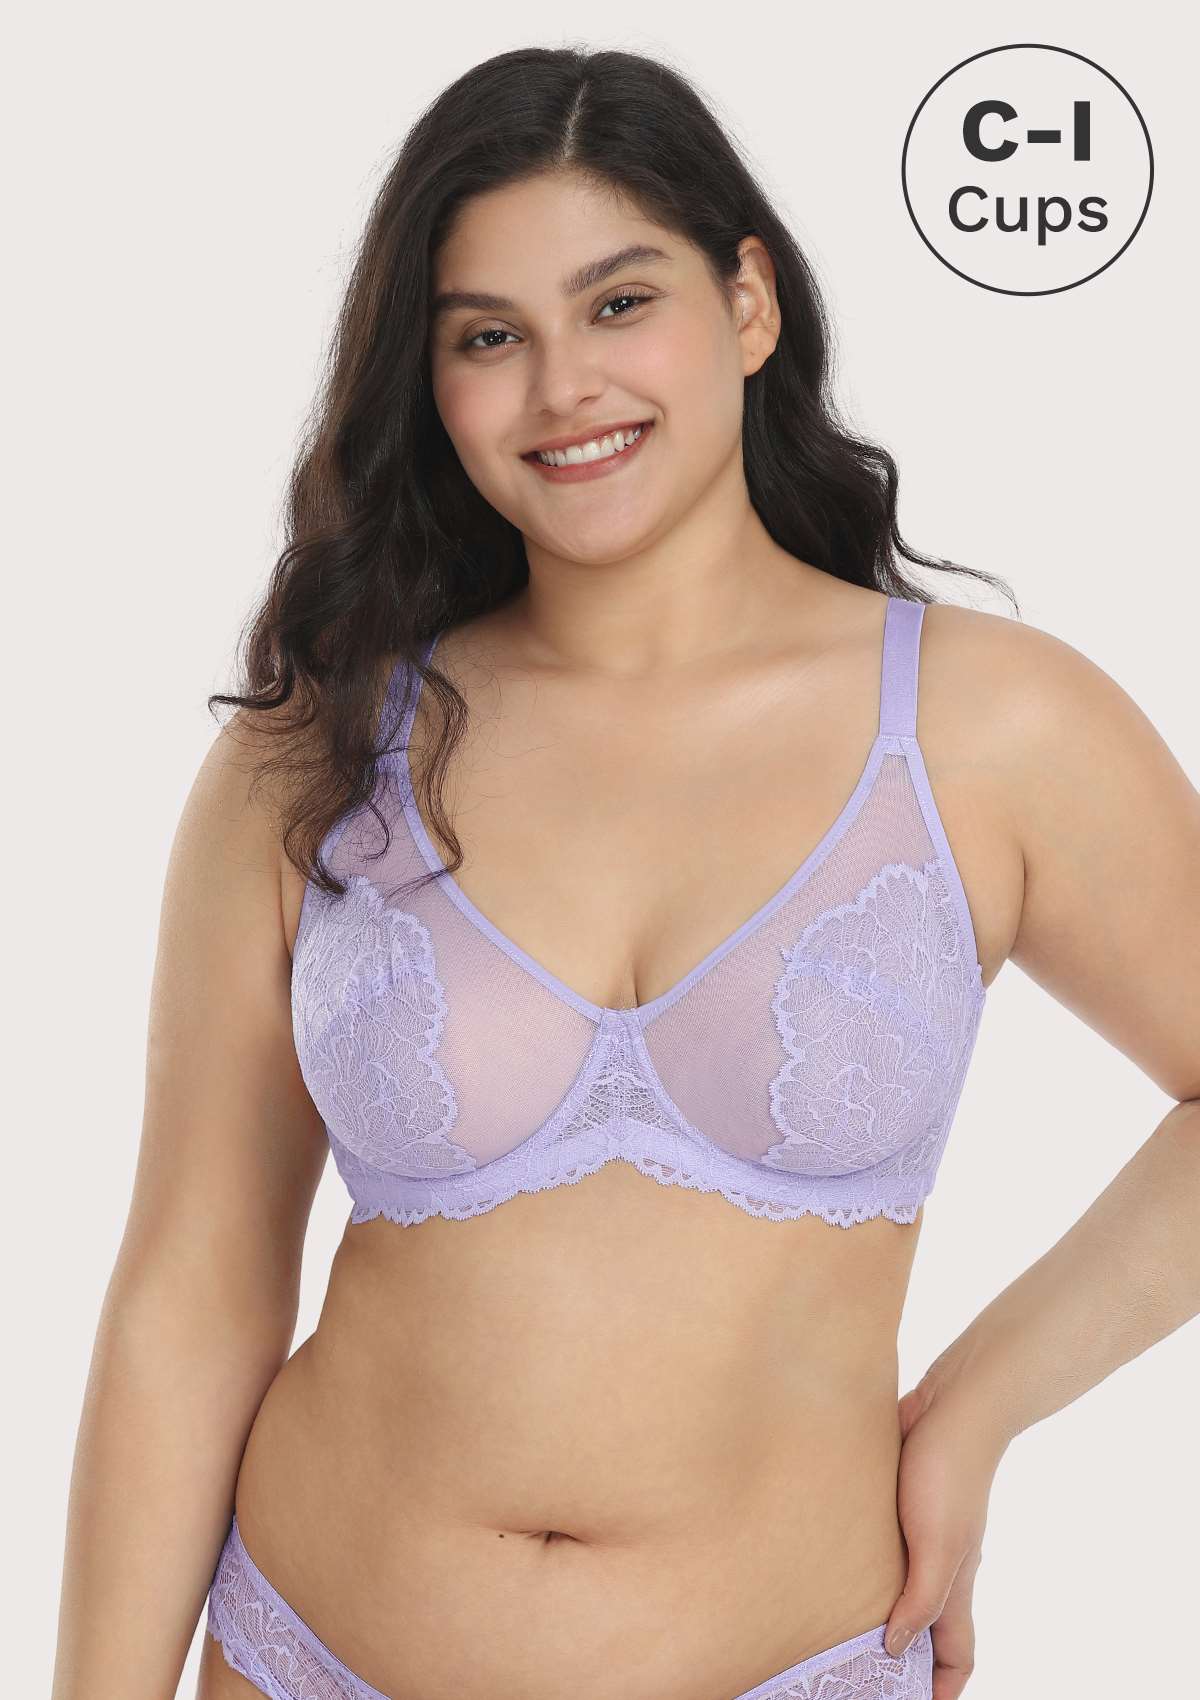 HSIA Blossom Transparent Lace Bra: Plus Size Wired Back Smoothing Bra - Light Purple / 40 / D